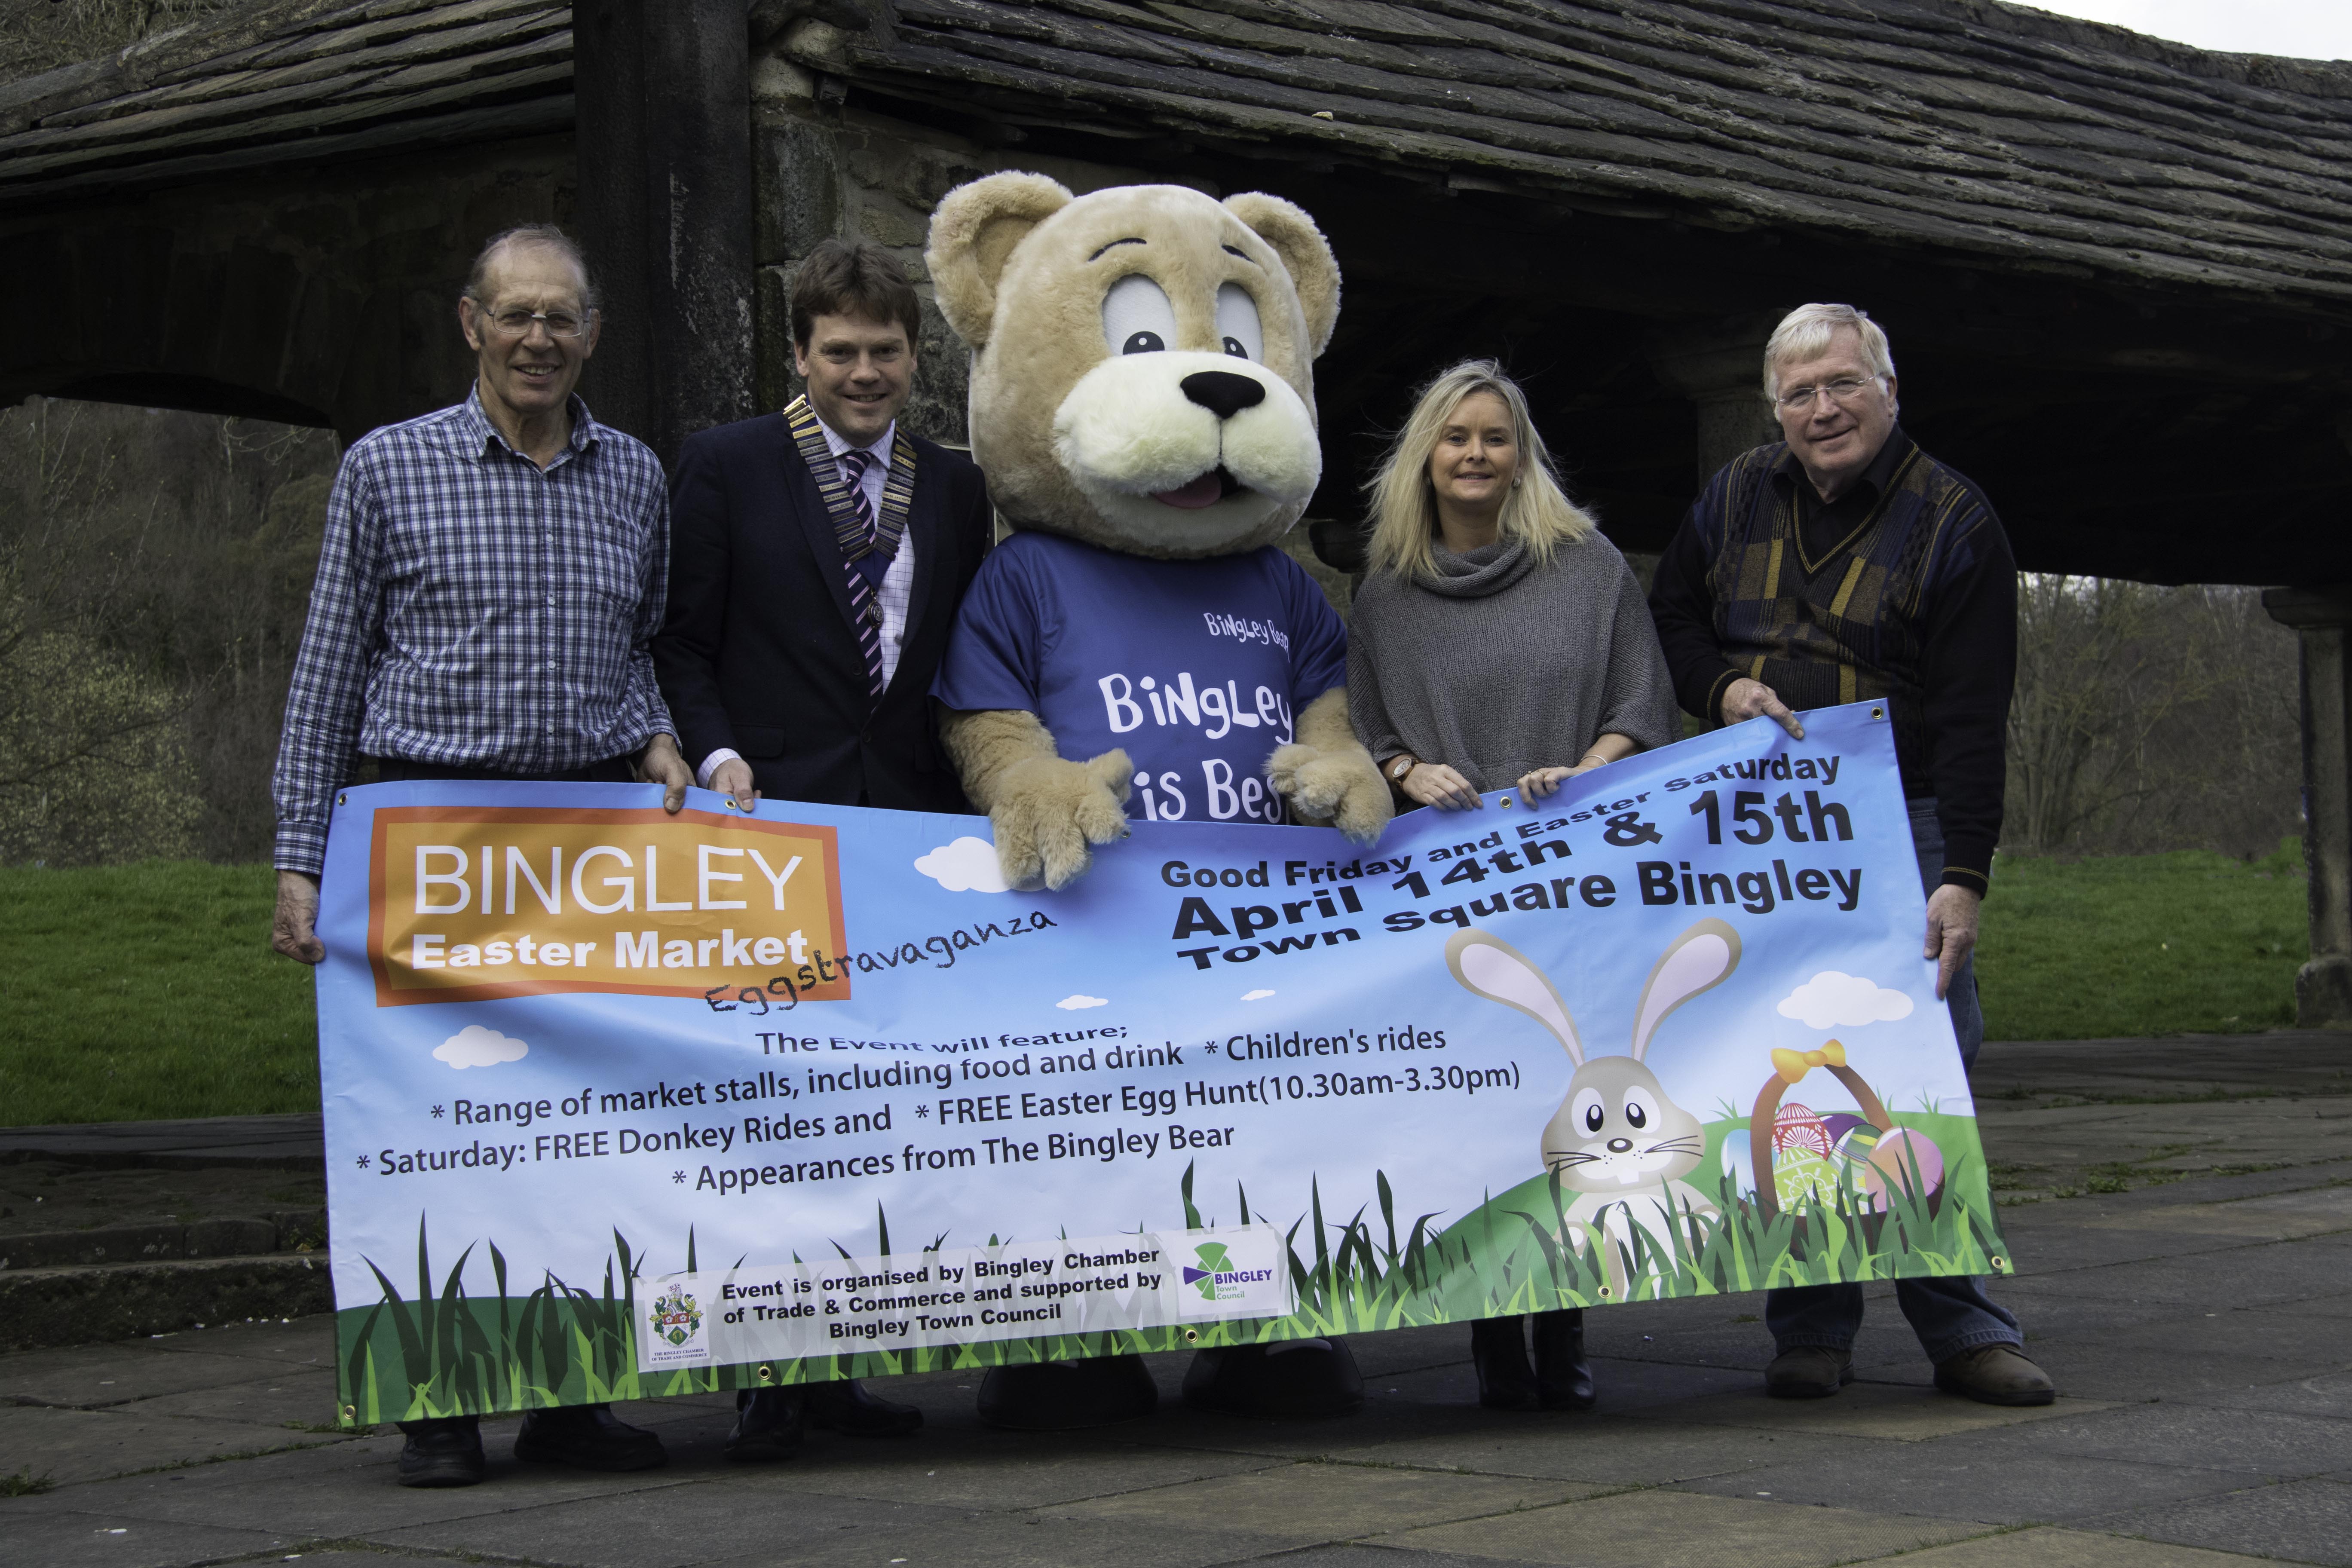 Bingley hosts Easter Market Extravaganza: all welcome!